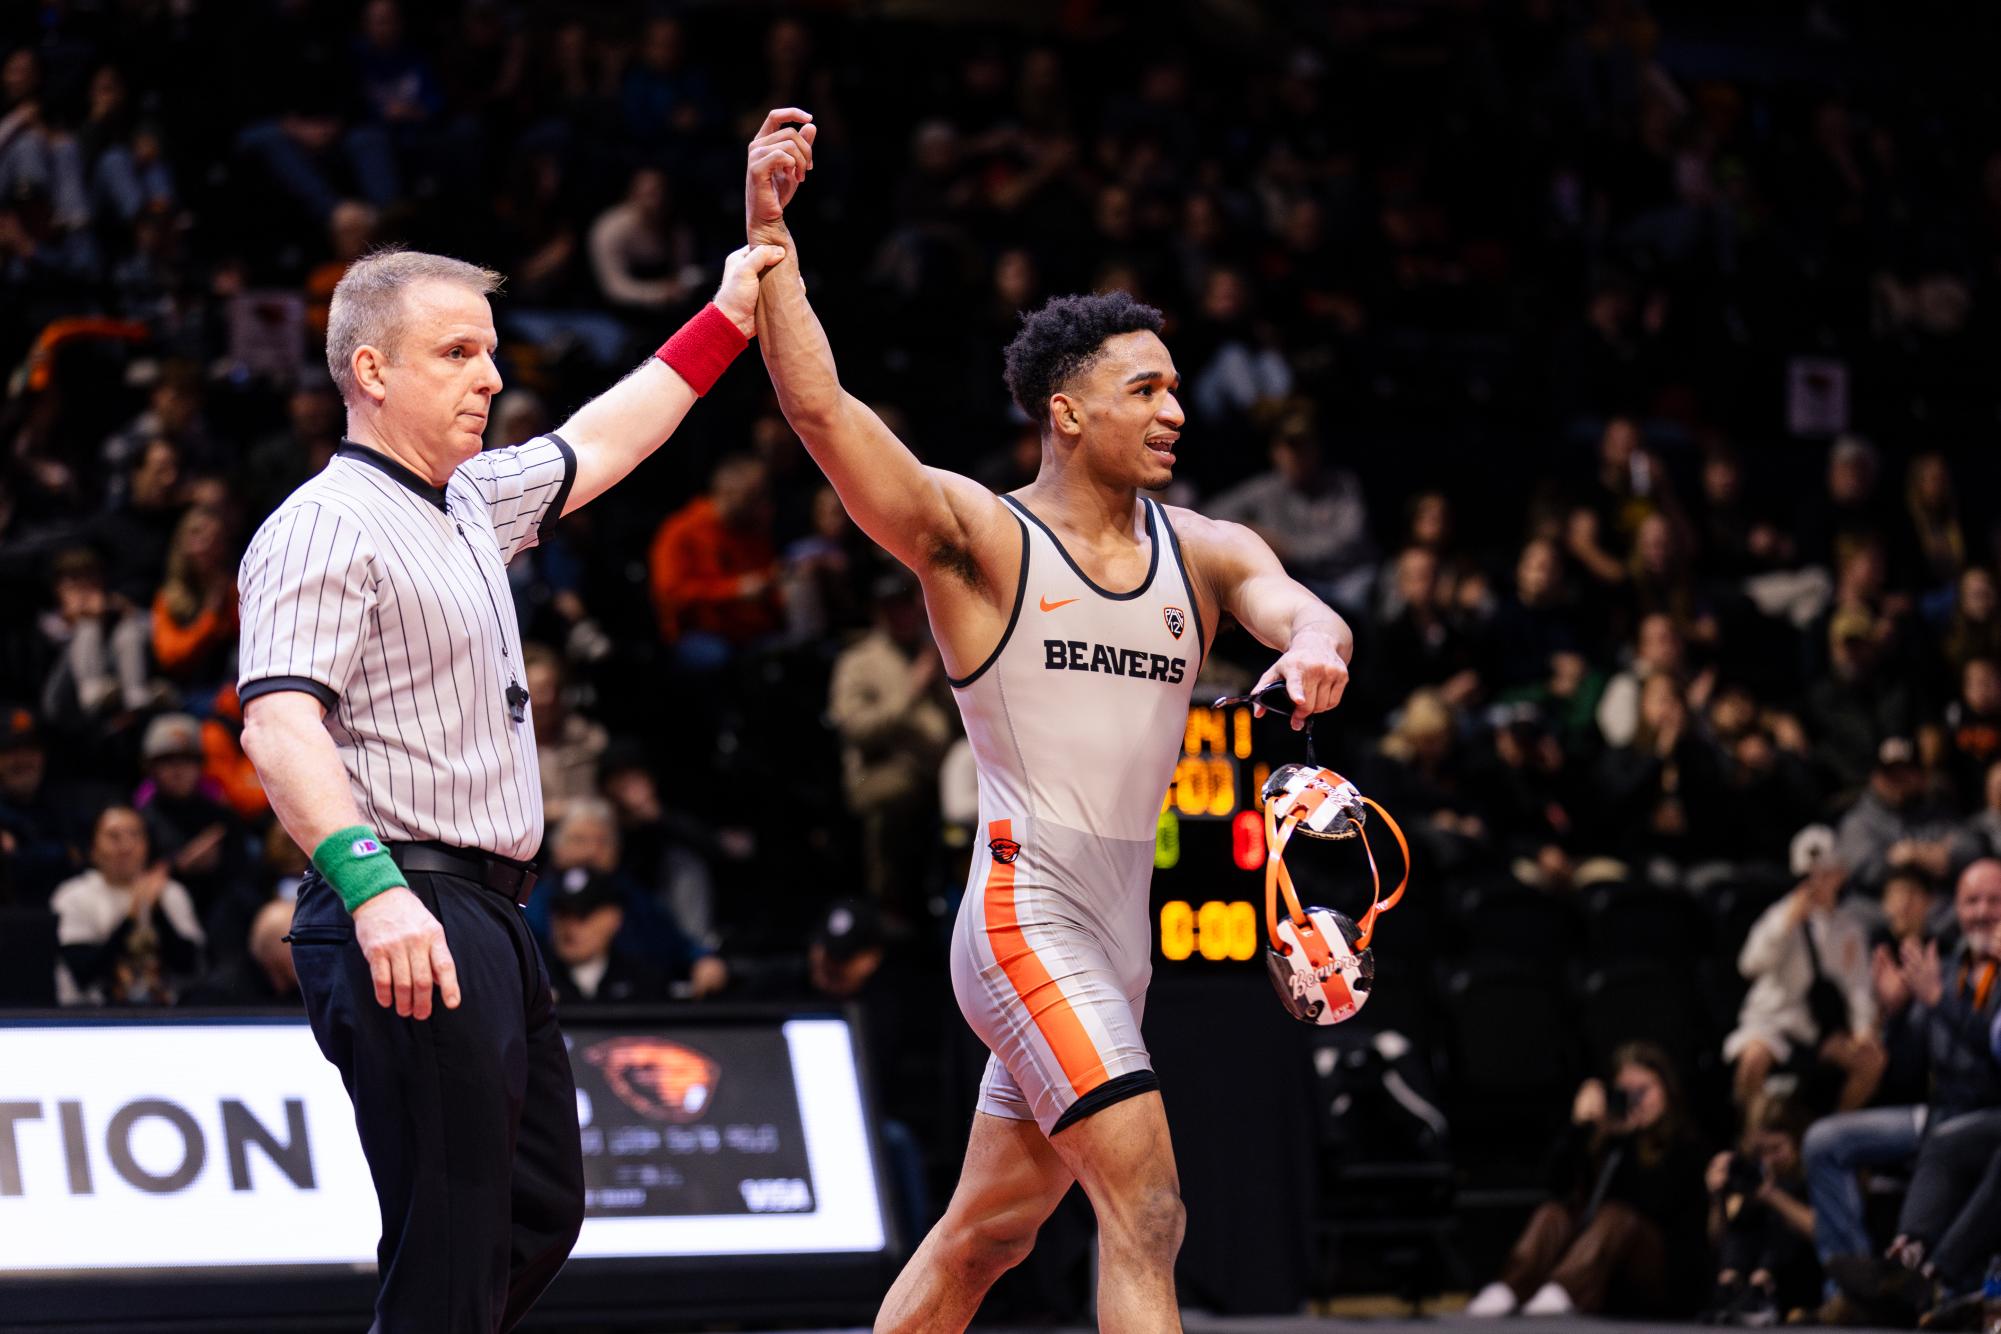 Cleveland Belton wins his match against his Cal Poly opponent Abe Hinrichsen at Gill Coliseum in Corvallis on Jan. 19.
